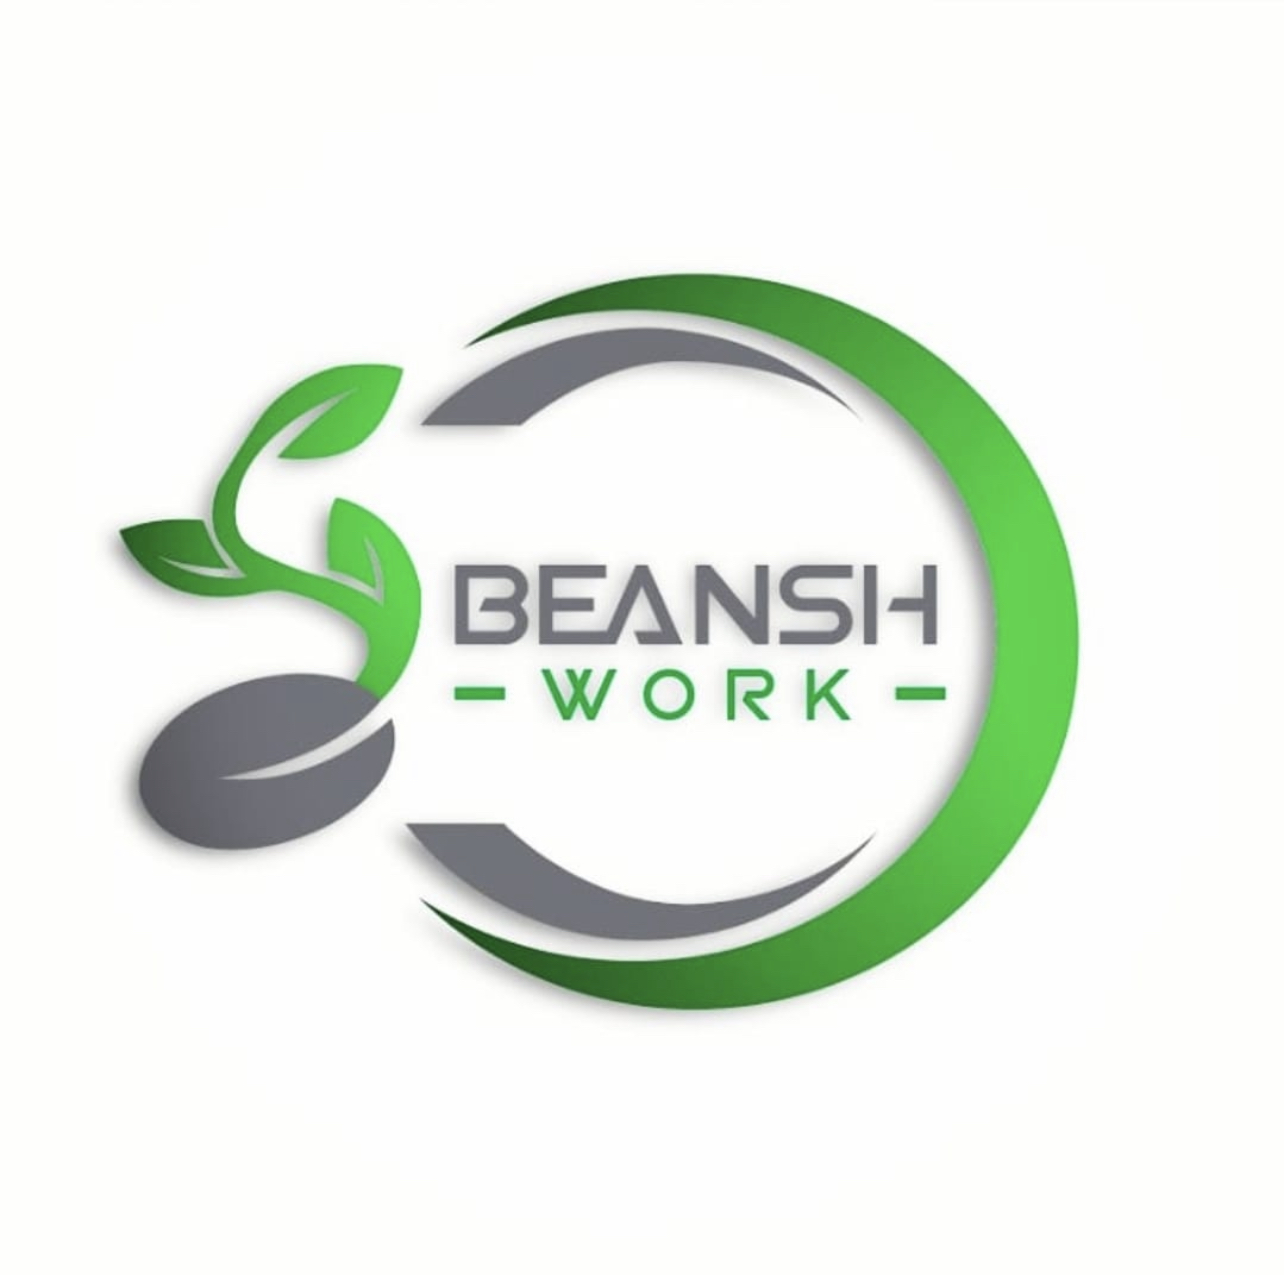 https://my.mncjobz.com/company/beansh-business-services-sdn-bhd-1637812548